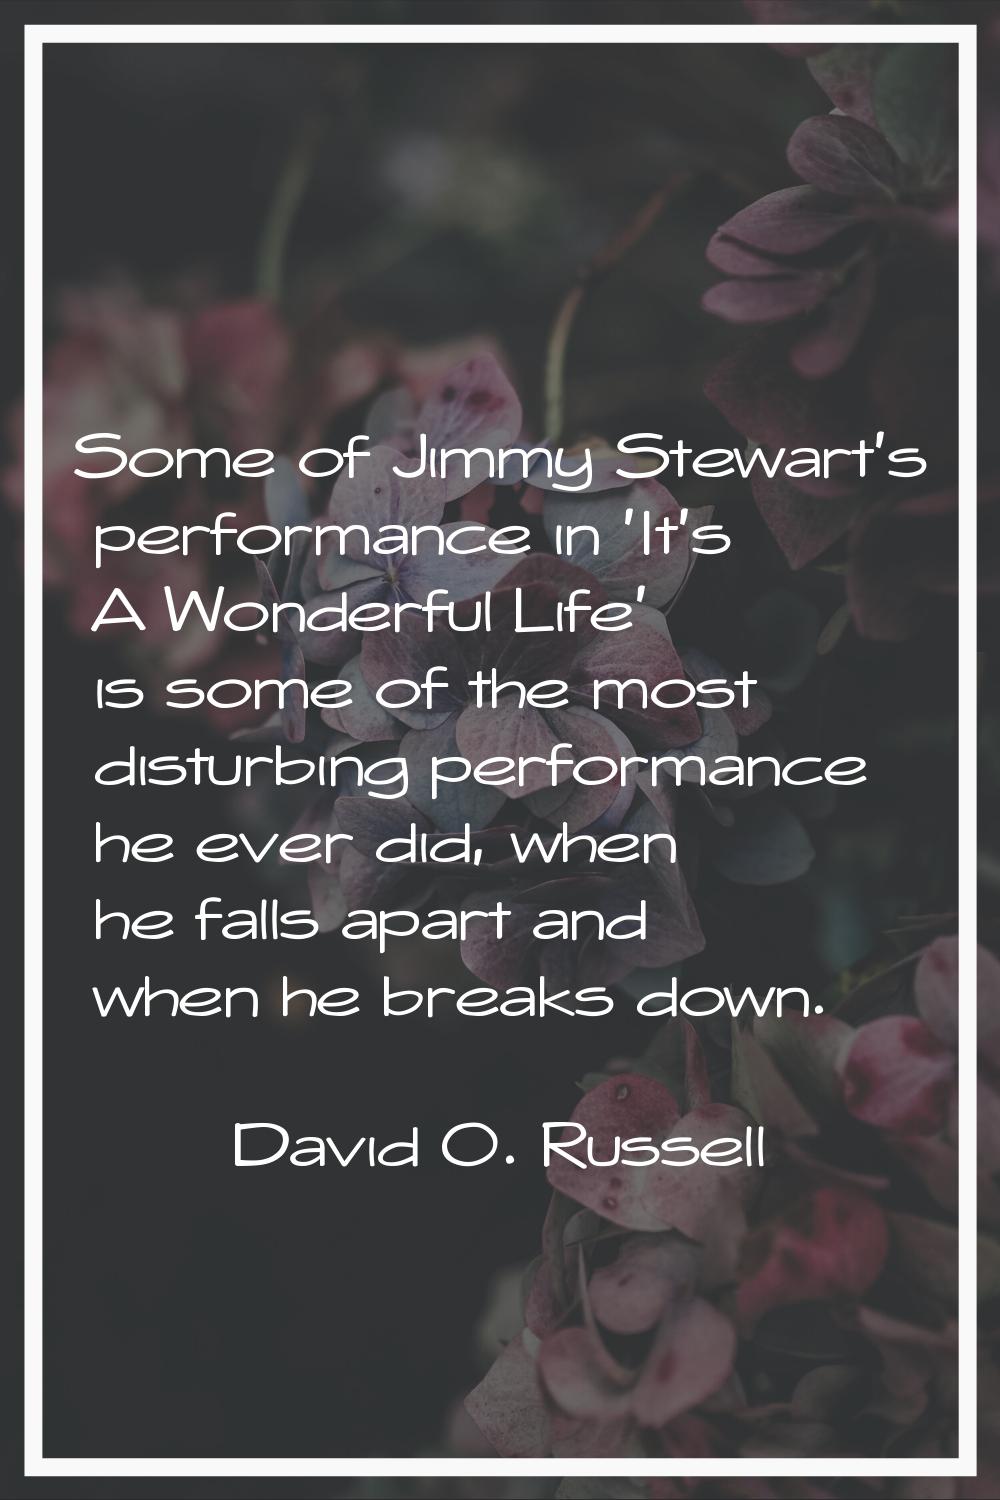 Some of Jimmy Stewart's performance in 'It's A Wonderful Life' is some of the most disturbing perfo